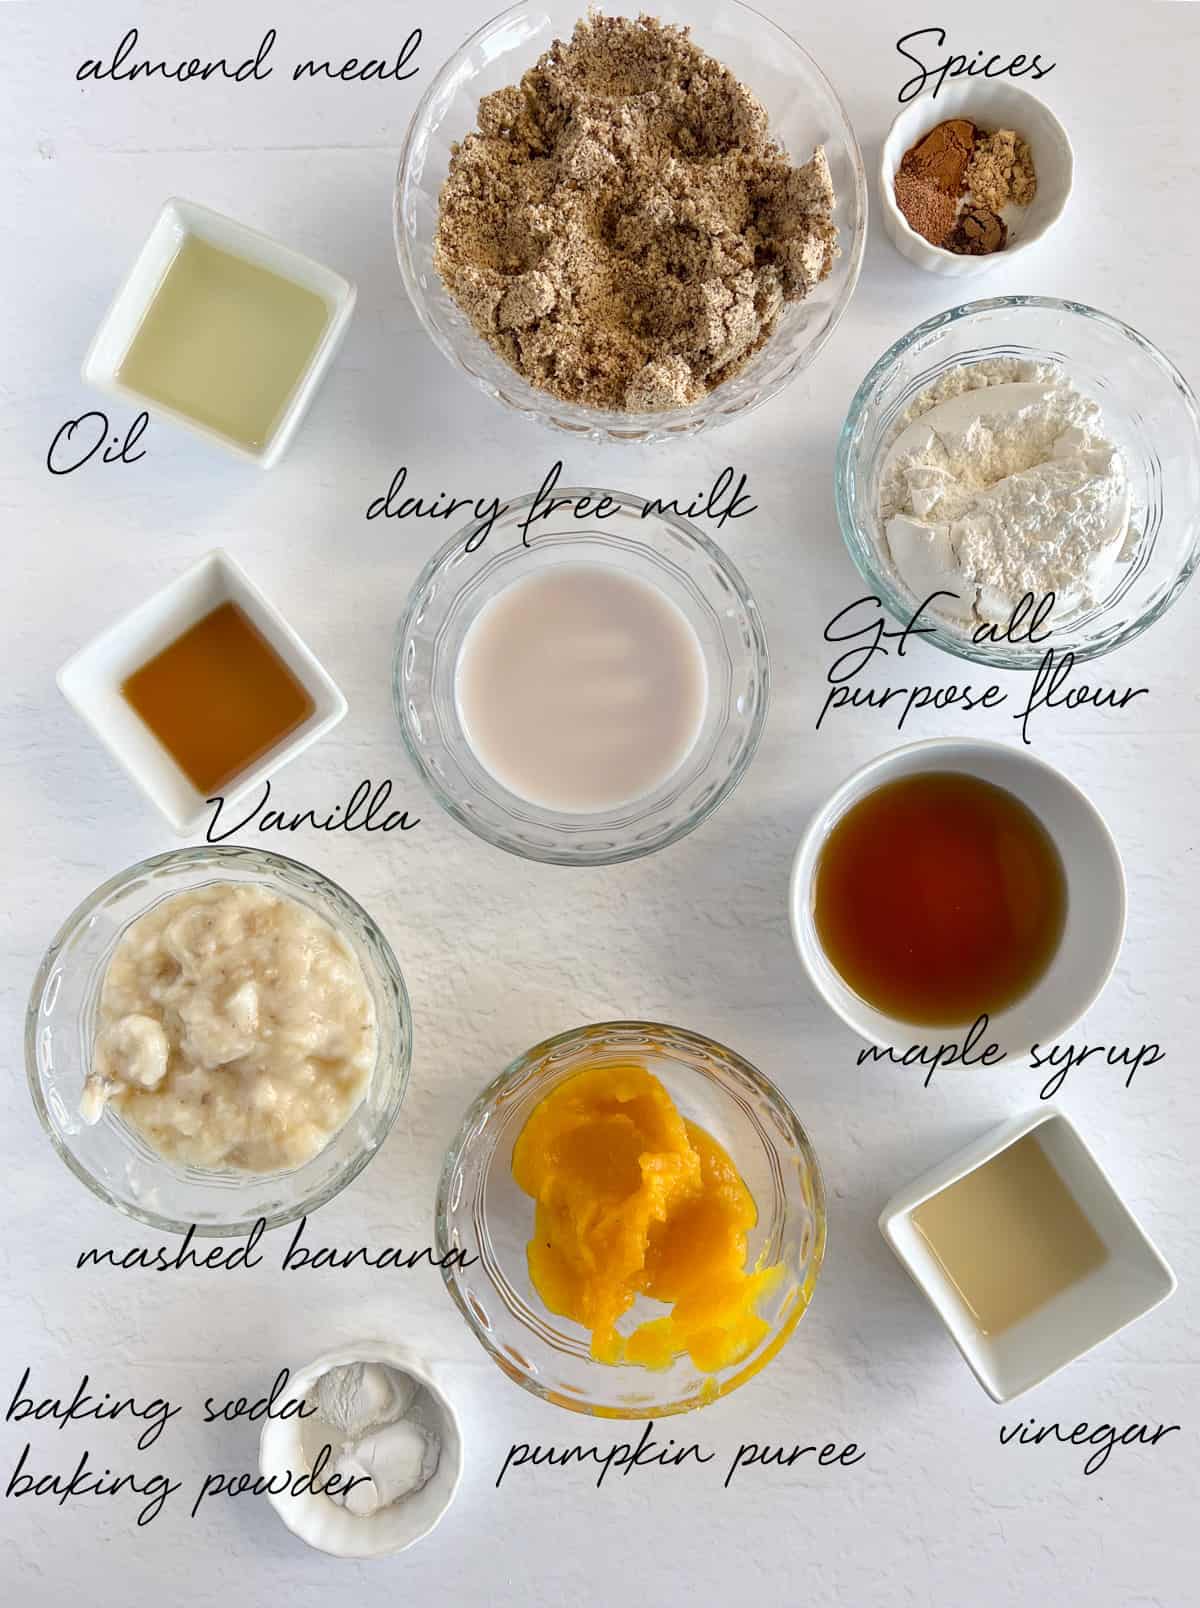 almon meal, oil, spices, flour, maple syrup, pumpkin puree, mashed banana, baking soda and powder, vinegar, vanilla and milk in bowls